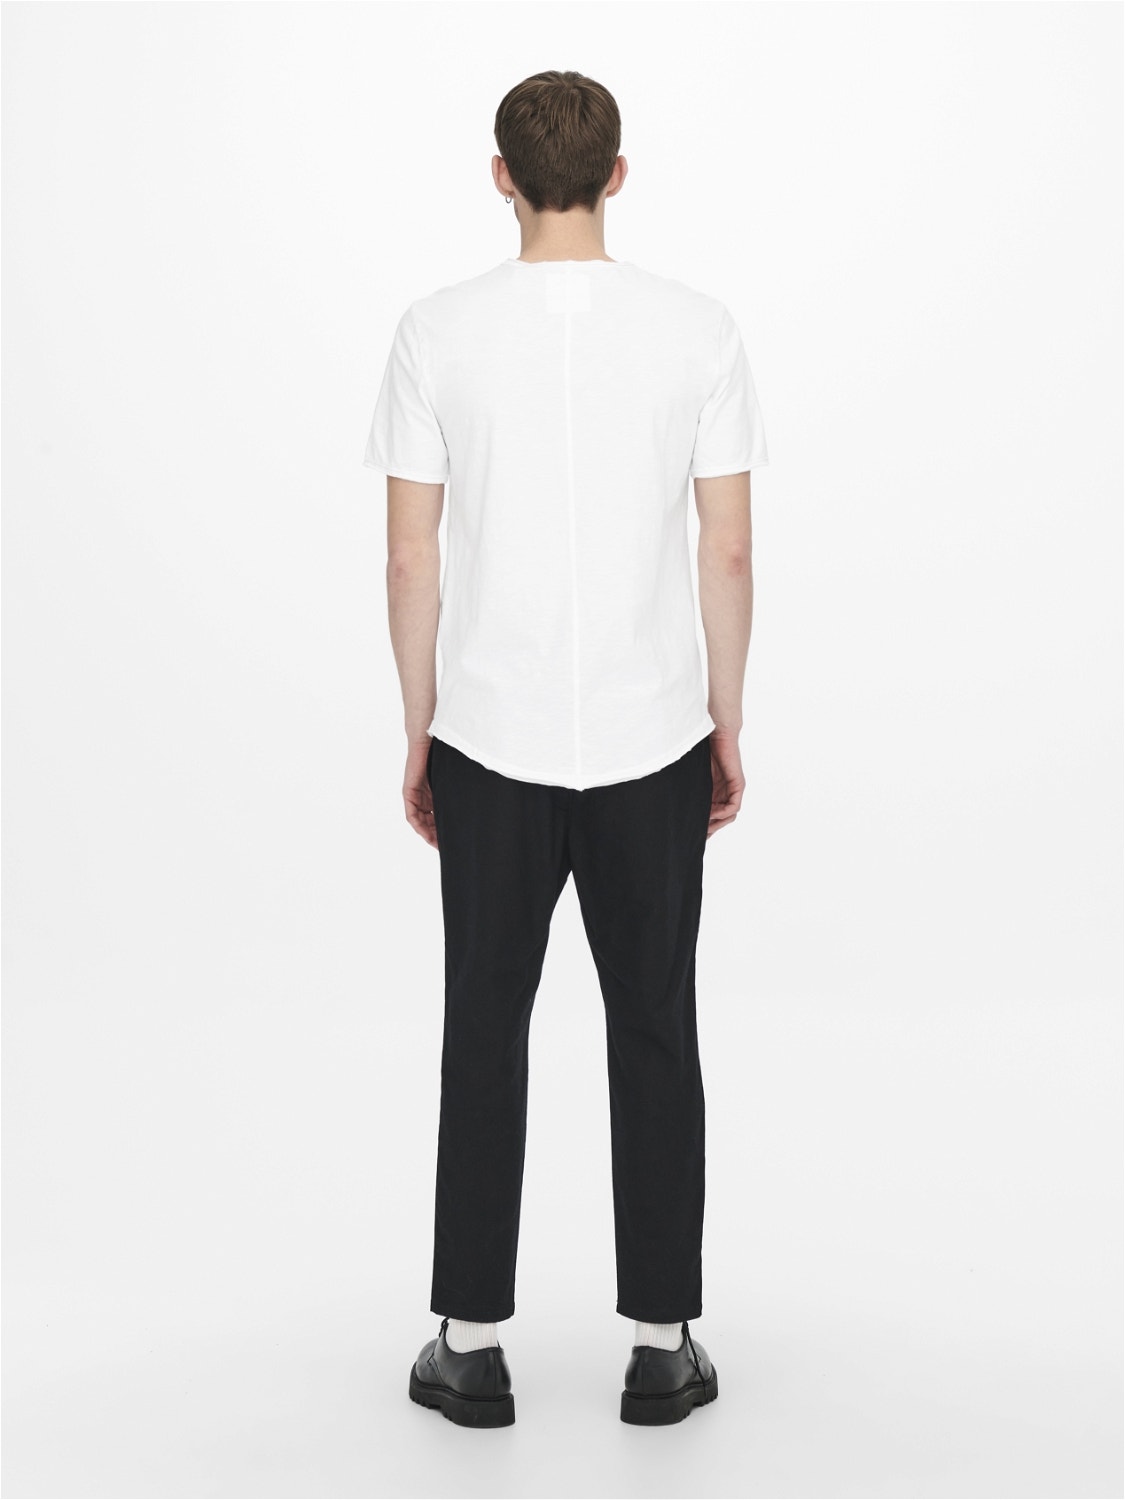 ONLY & SONS Long Line Fit O-hals T-skjorte -Bright White - 22017822